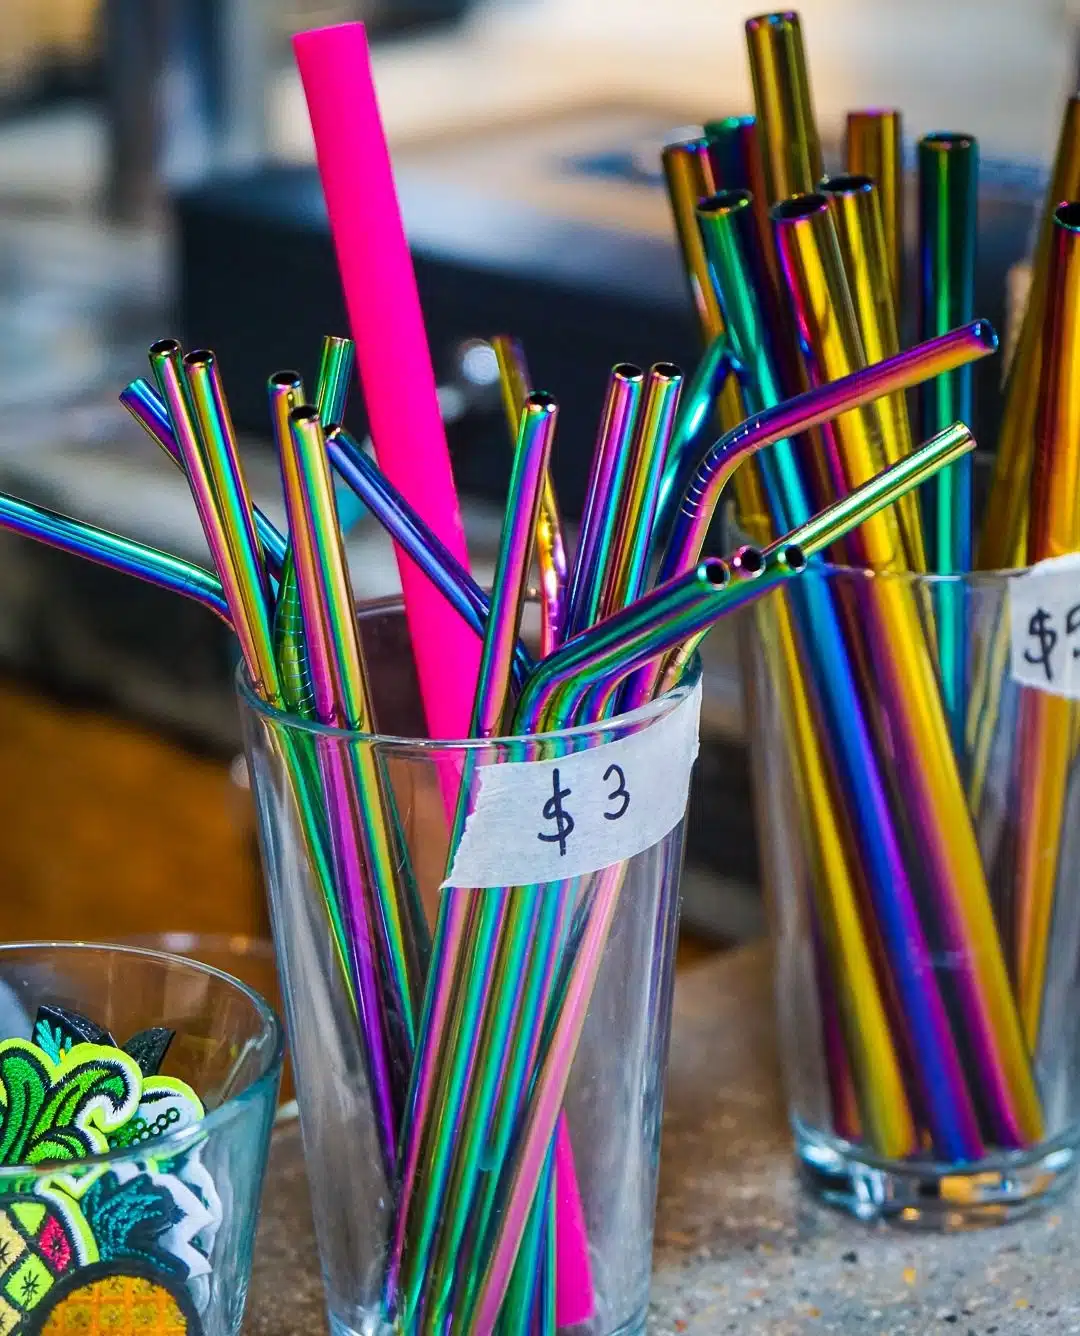 Central Square in Cambridge, MA has some of the best mural arts and local food in the Boston area, including Graffiti Alley! See tips from a tour that focuses on unique small businesses! Pictured: Rainbow metal straws at Abide.